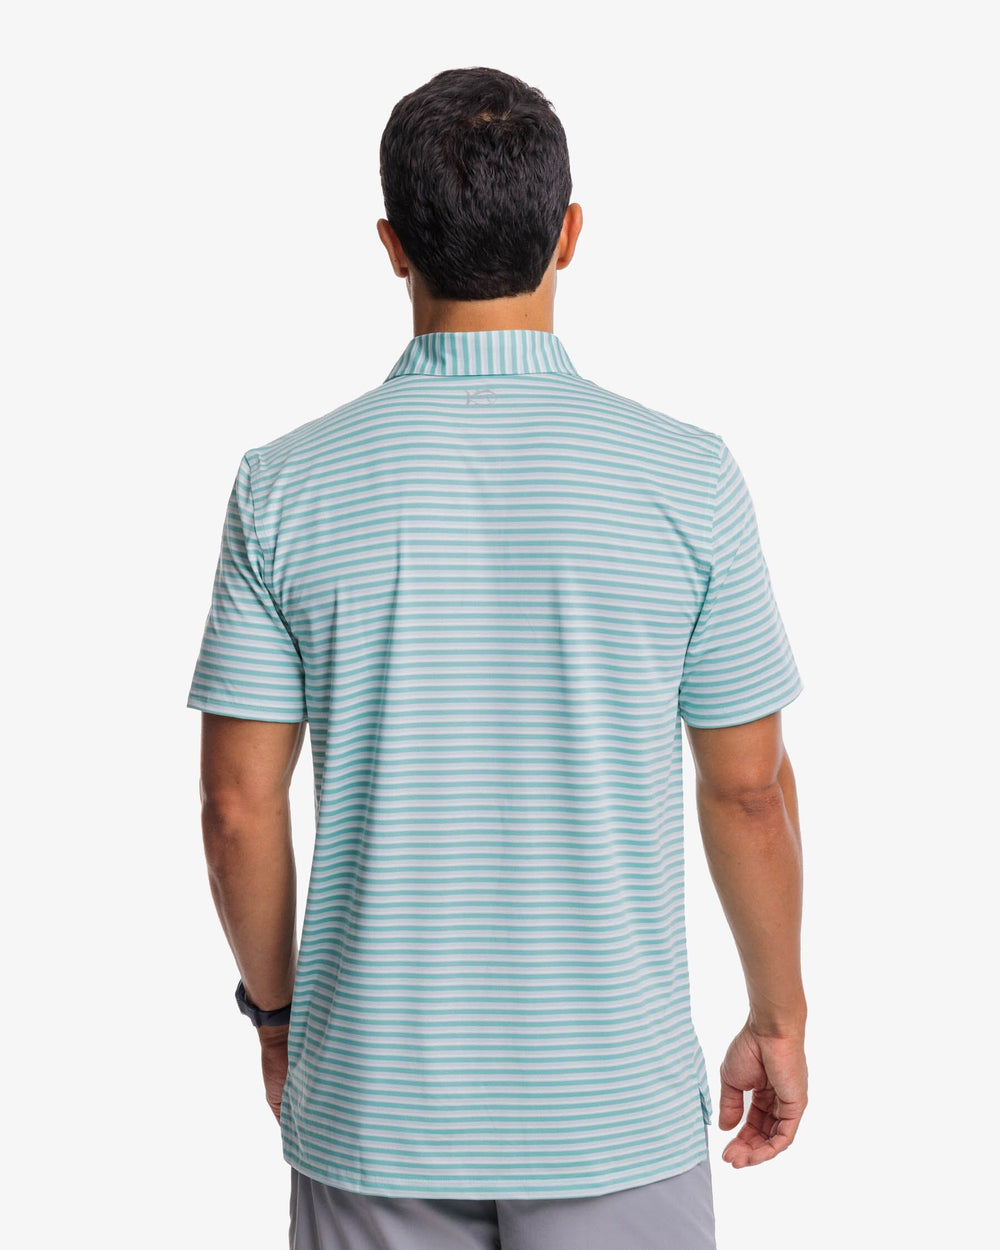 The back view of the Southern Tide Driver Gulf Stripe Polo Shirt by Southern Tide - Turquoise Sea